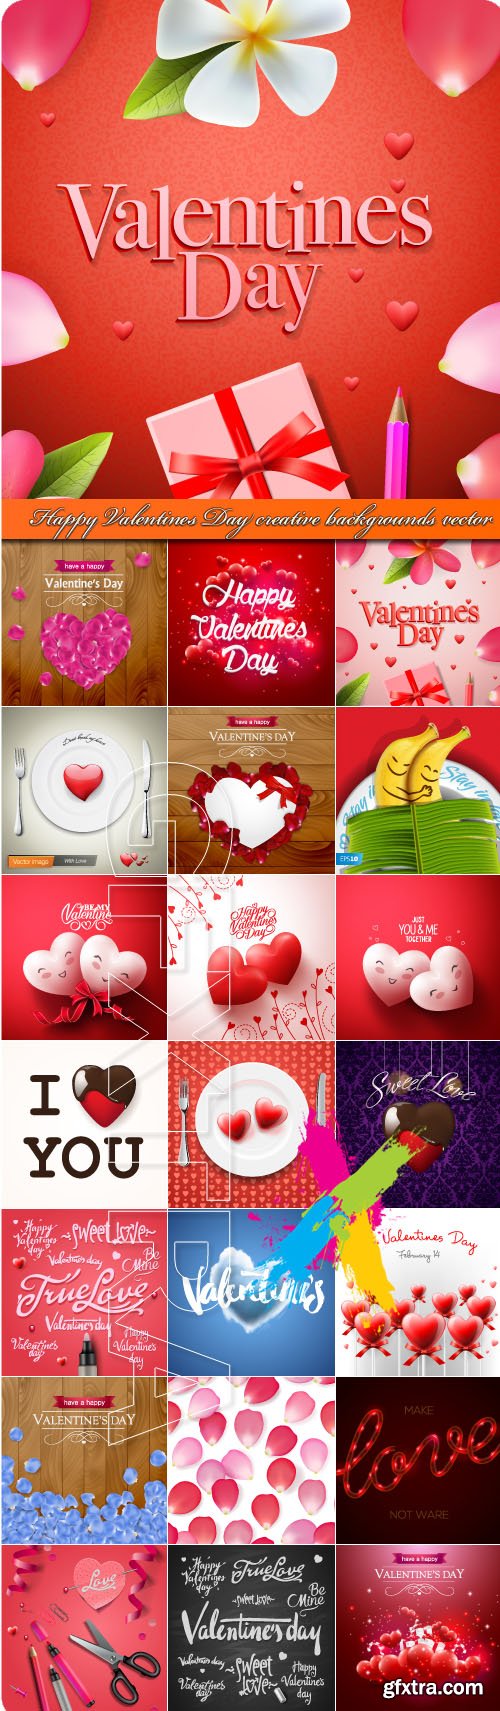 Happy Valentines Day creative backgrounds vector